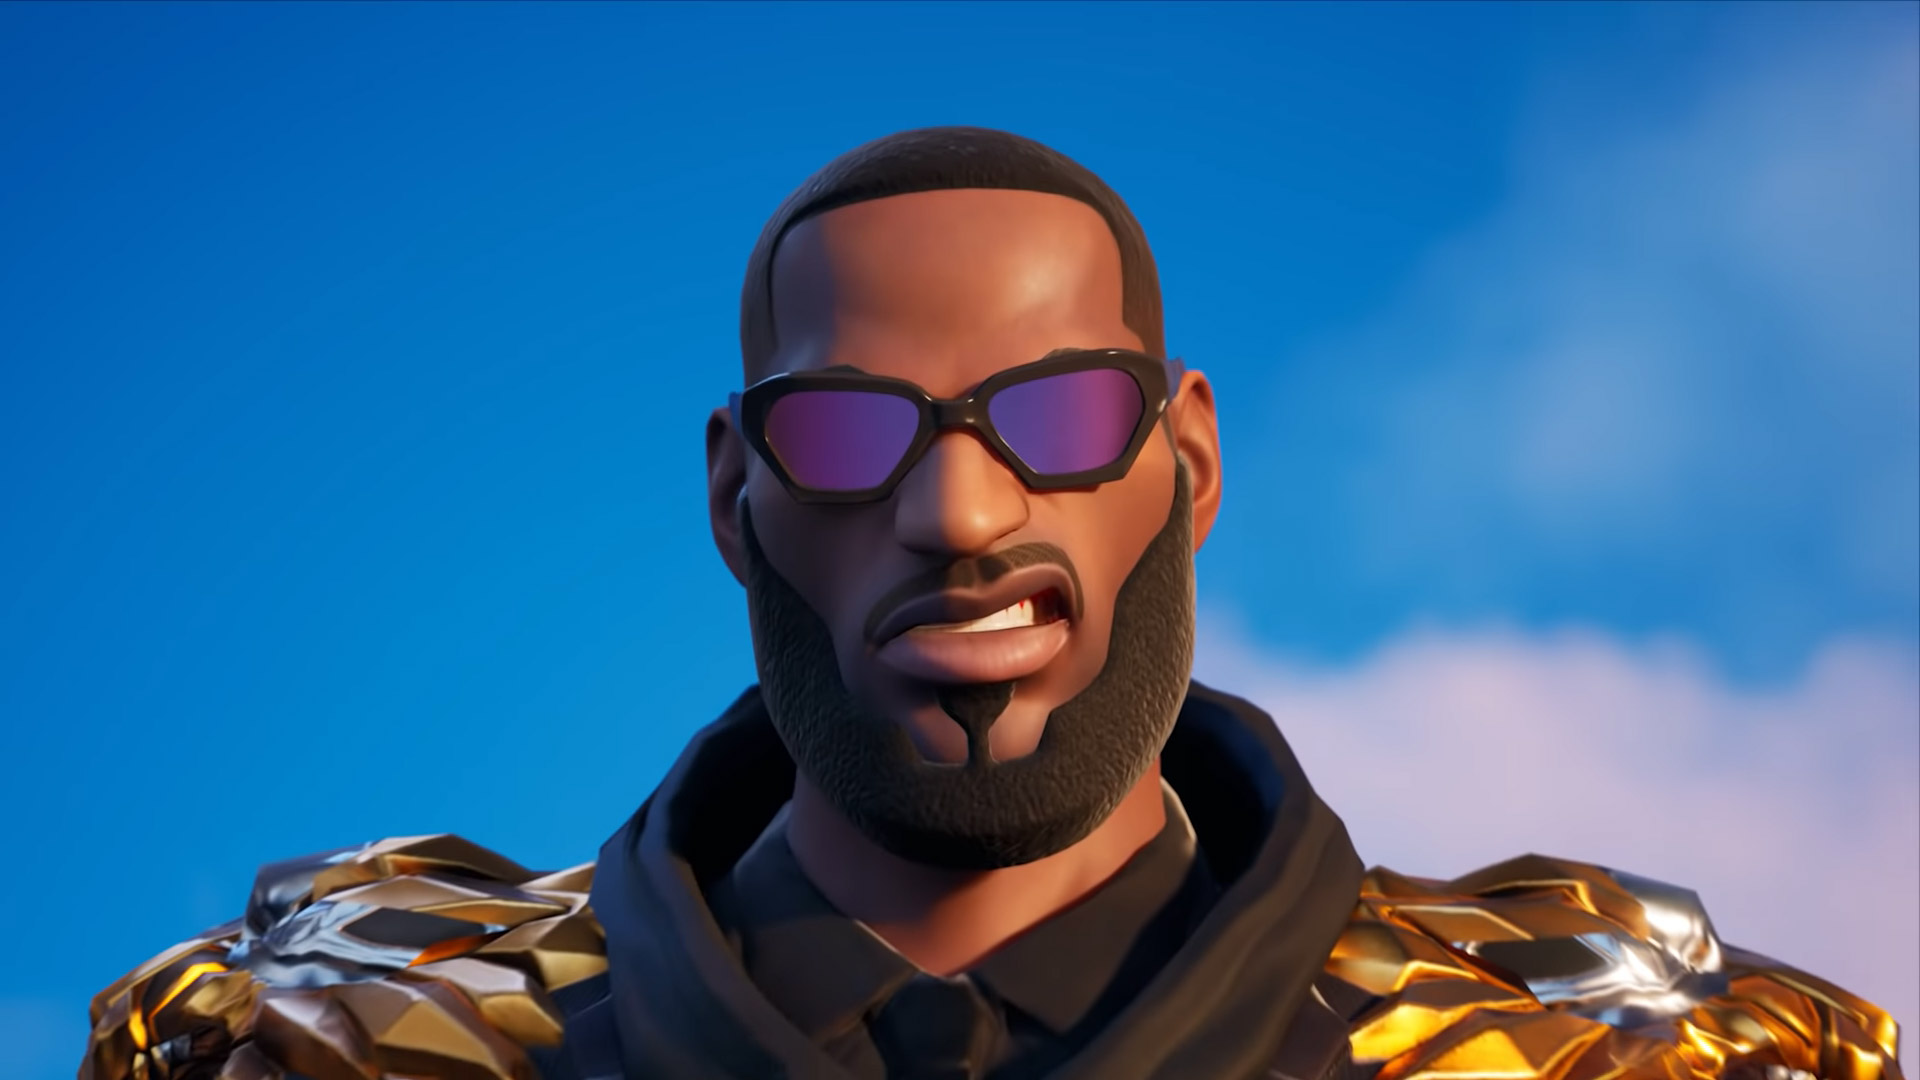 You can soon dunk on everyone as Lebron James in Fortnite